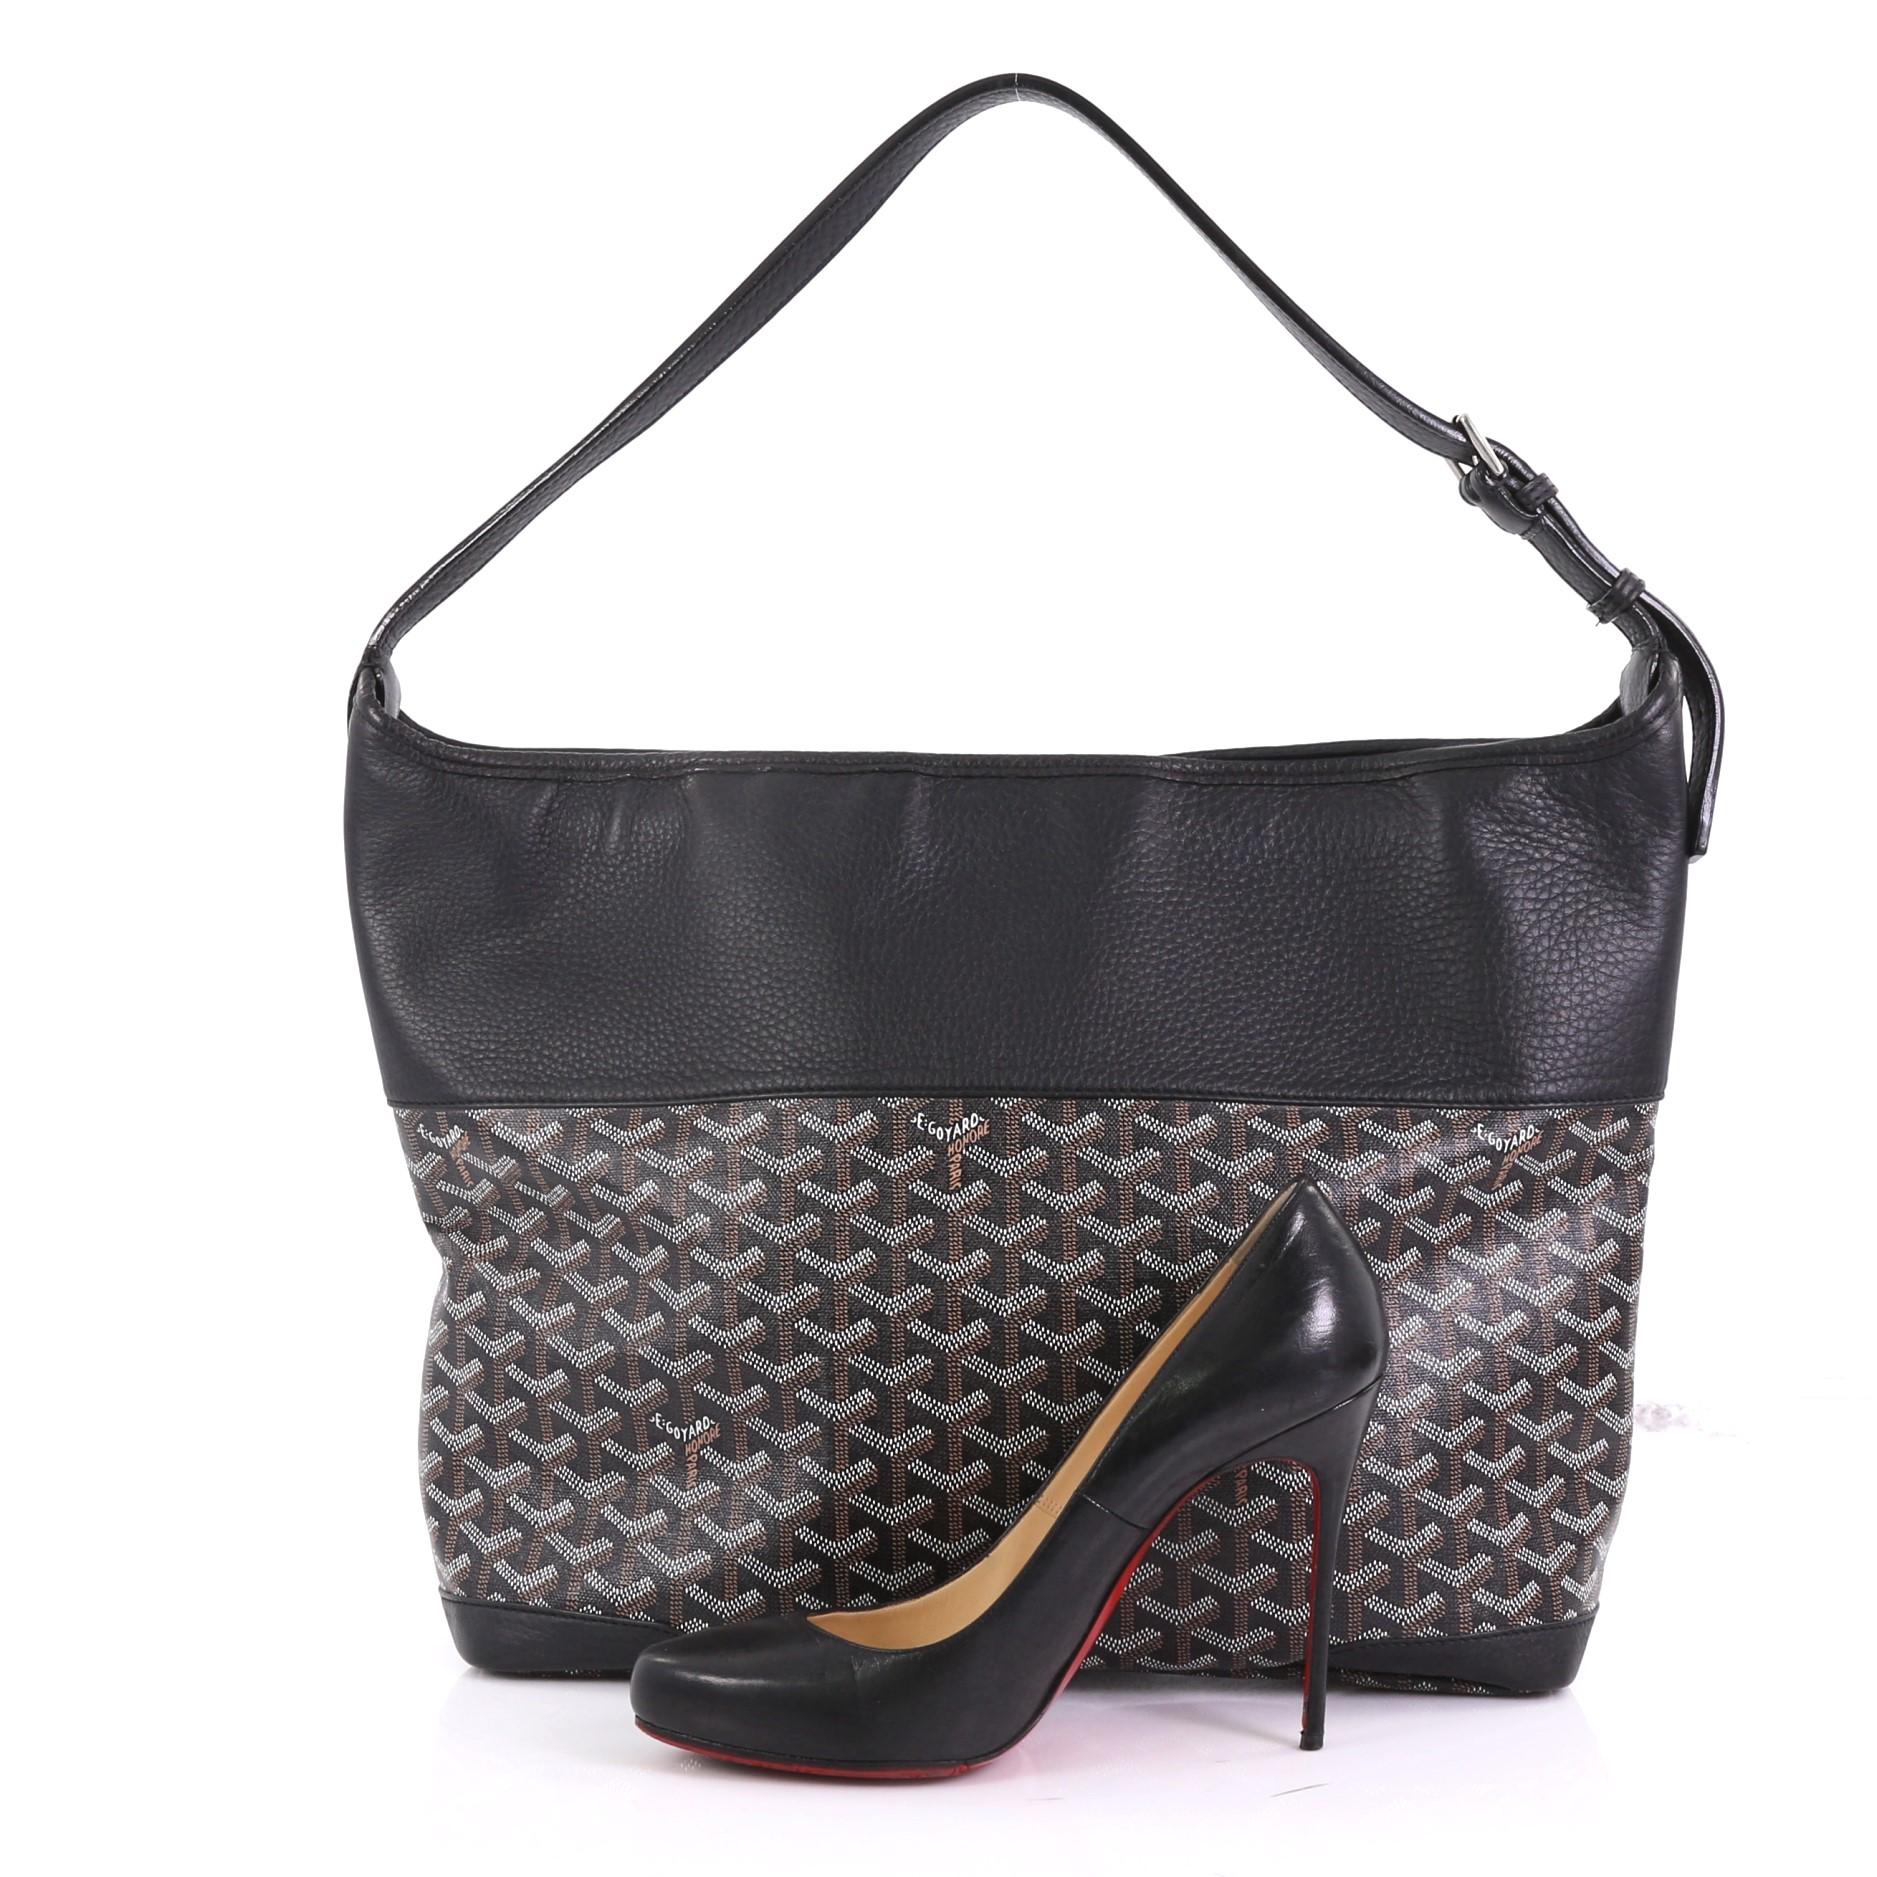 This Goyard Grenadine Hobo Coated Canvas with Leather, crafted from black coated canvas with leather, features an adjustable flat leather shoulder strap, leather trim, and silver-tone hardware. Its zip closure opens to a beige fabric interior.